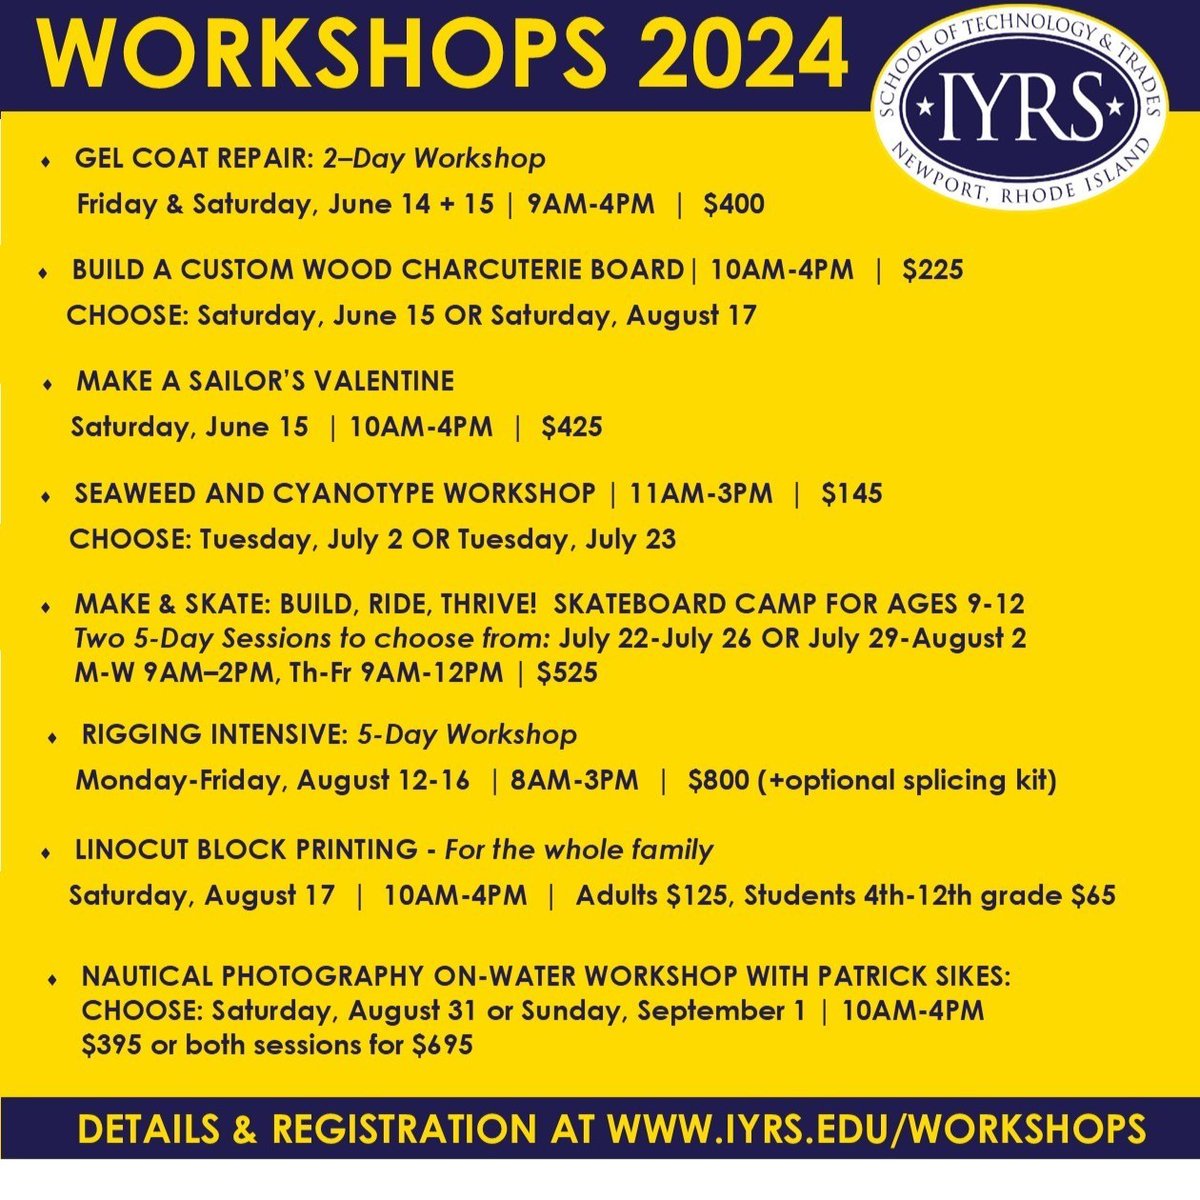 We are excited to announce our Summer Community Workshop schedule. With 4 NEW HANDS-ON workshops, there is something for everyone! For detailed descriptions and to register, please visit iyrs.edu/workshops #iyrs #iyrsedu #handsonlearning